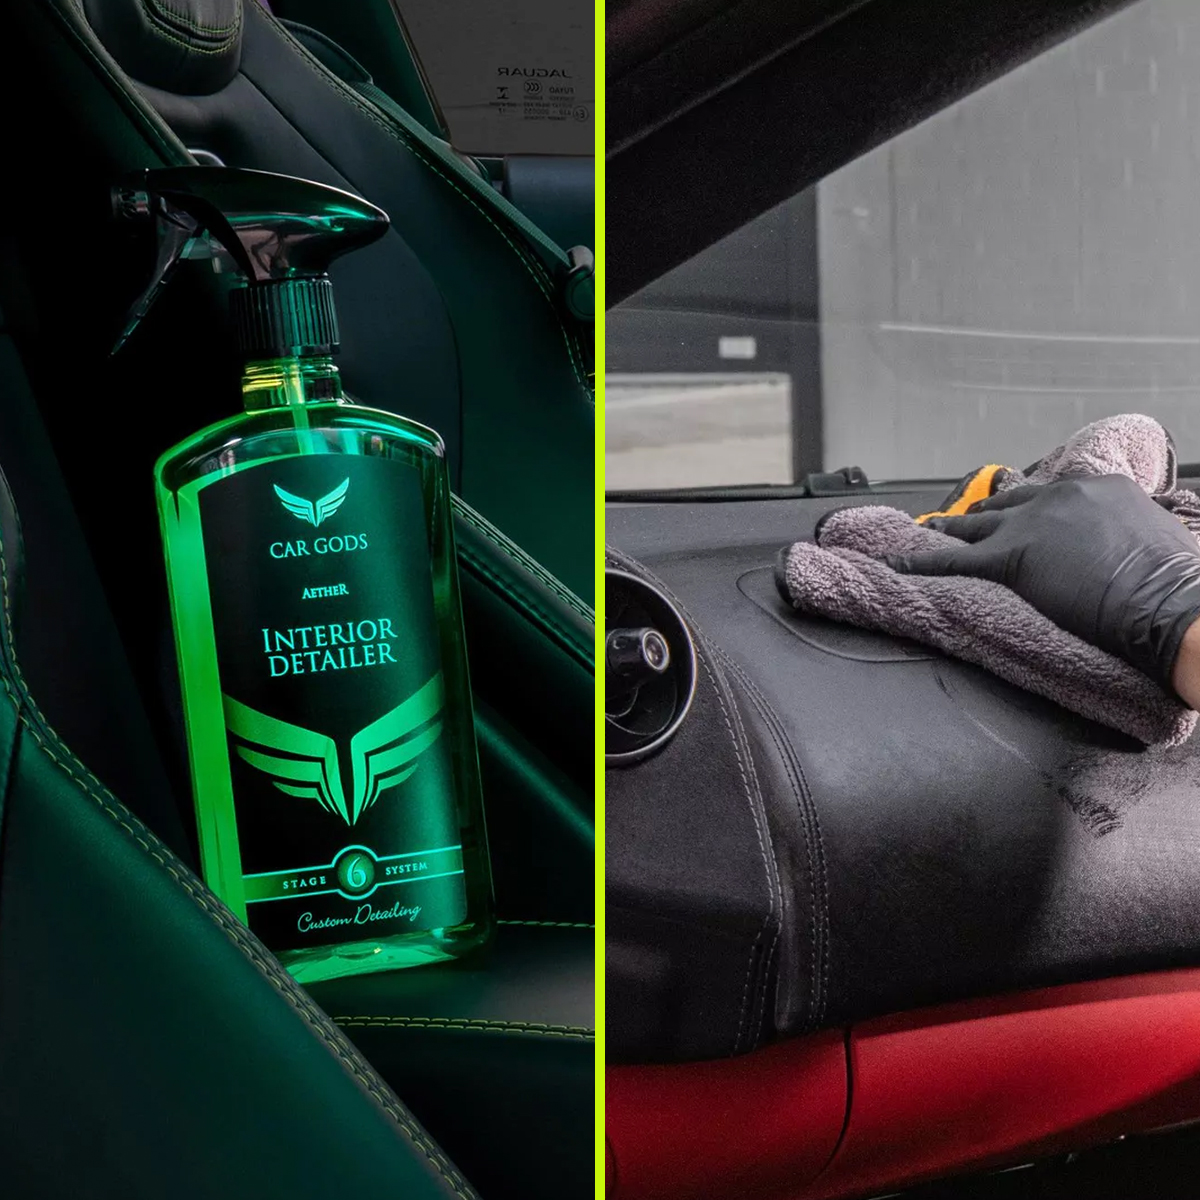 Image shows microfibre cloth being used to clean a dashboard with Car Gods Interior Detailer.